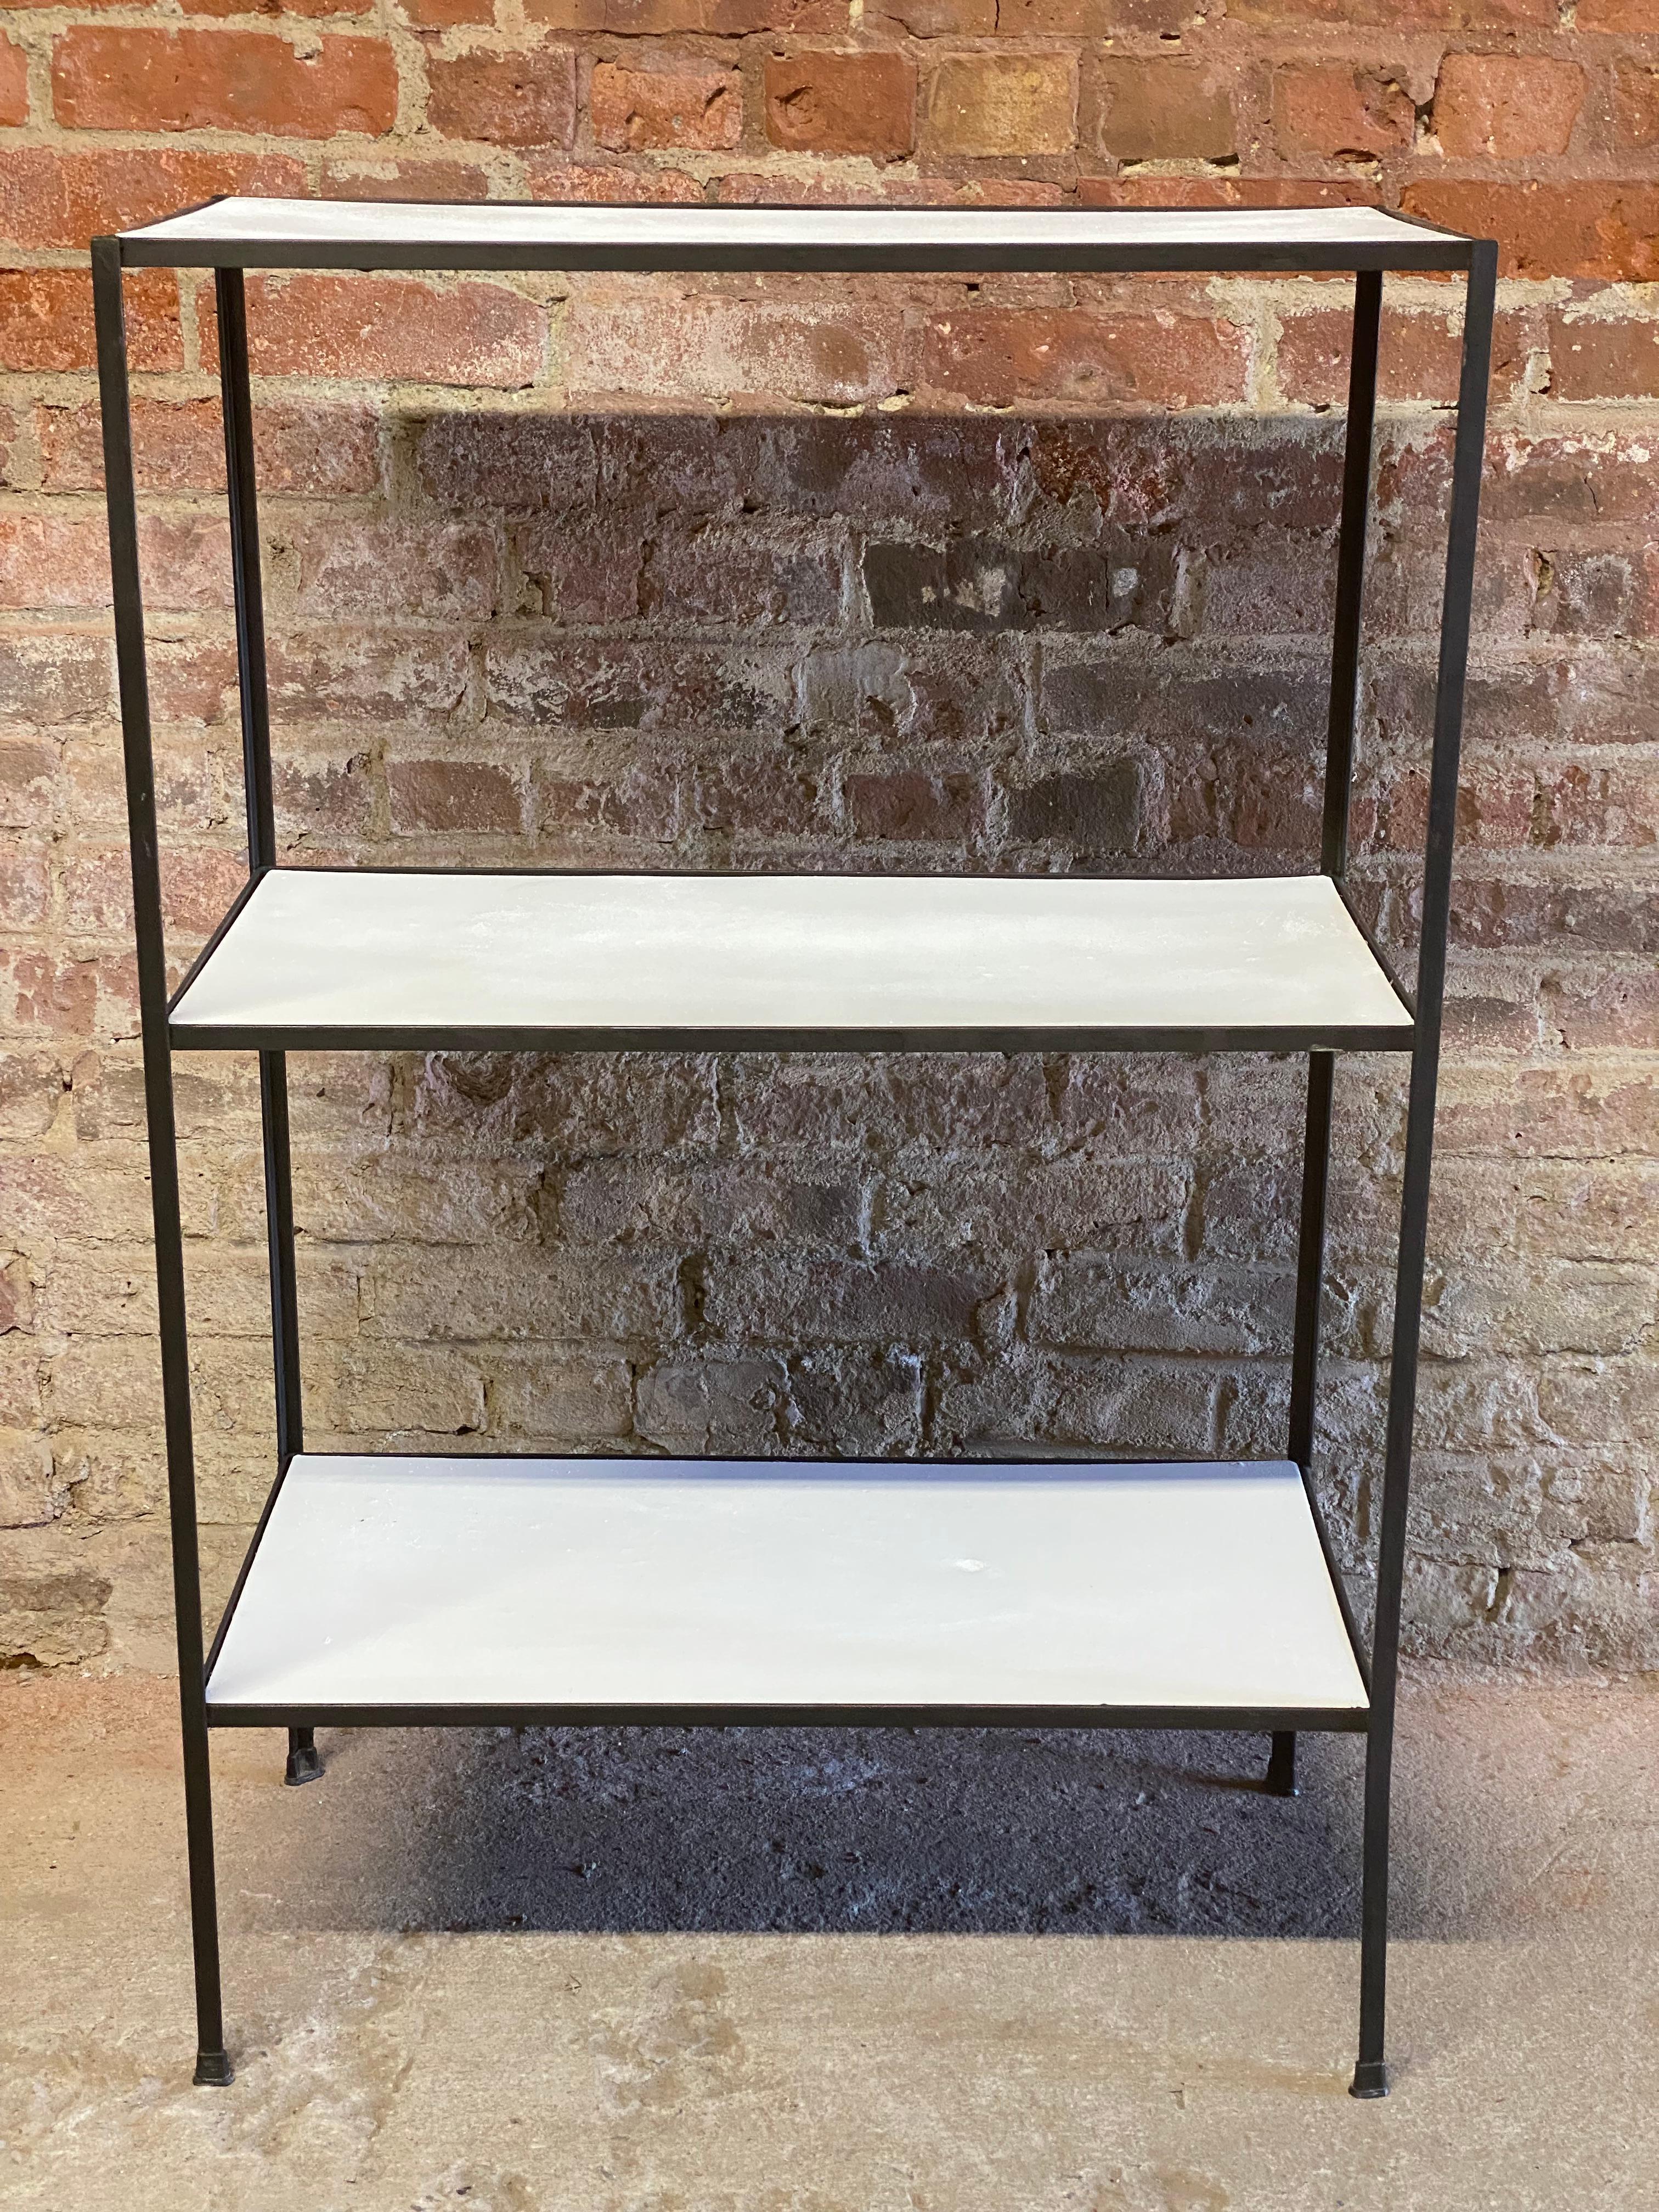 Iron and masonite three shelf unit designed by Frederick Weinberg. Angle iron construction with the original masonite shelves. Circa 1950-60. Good overall condition. The masonite shelves have been overpainted and have some divots, dings, swelling